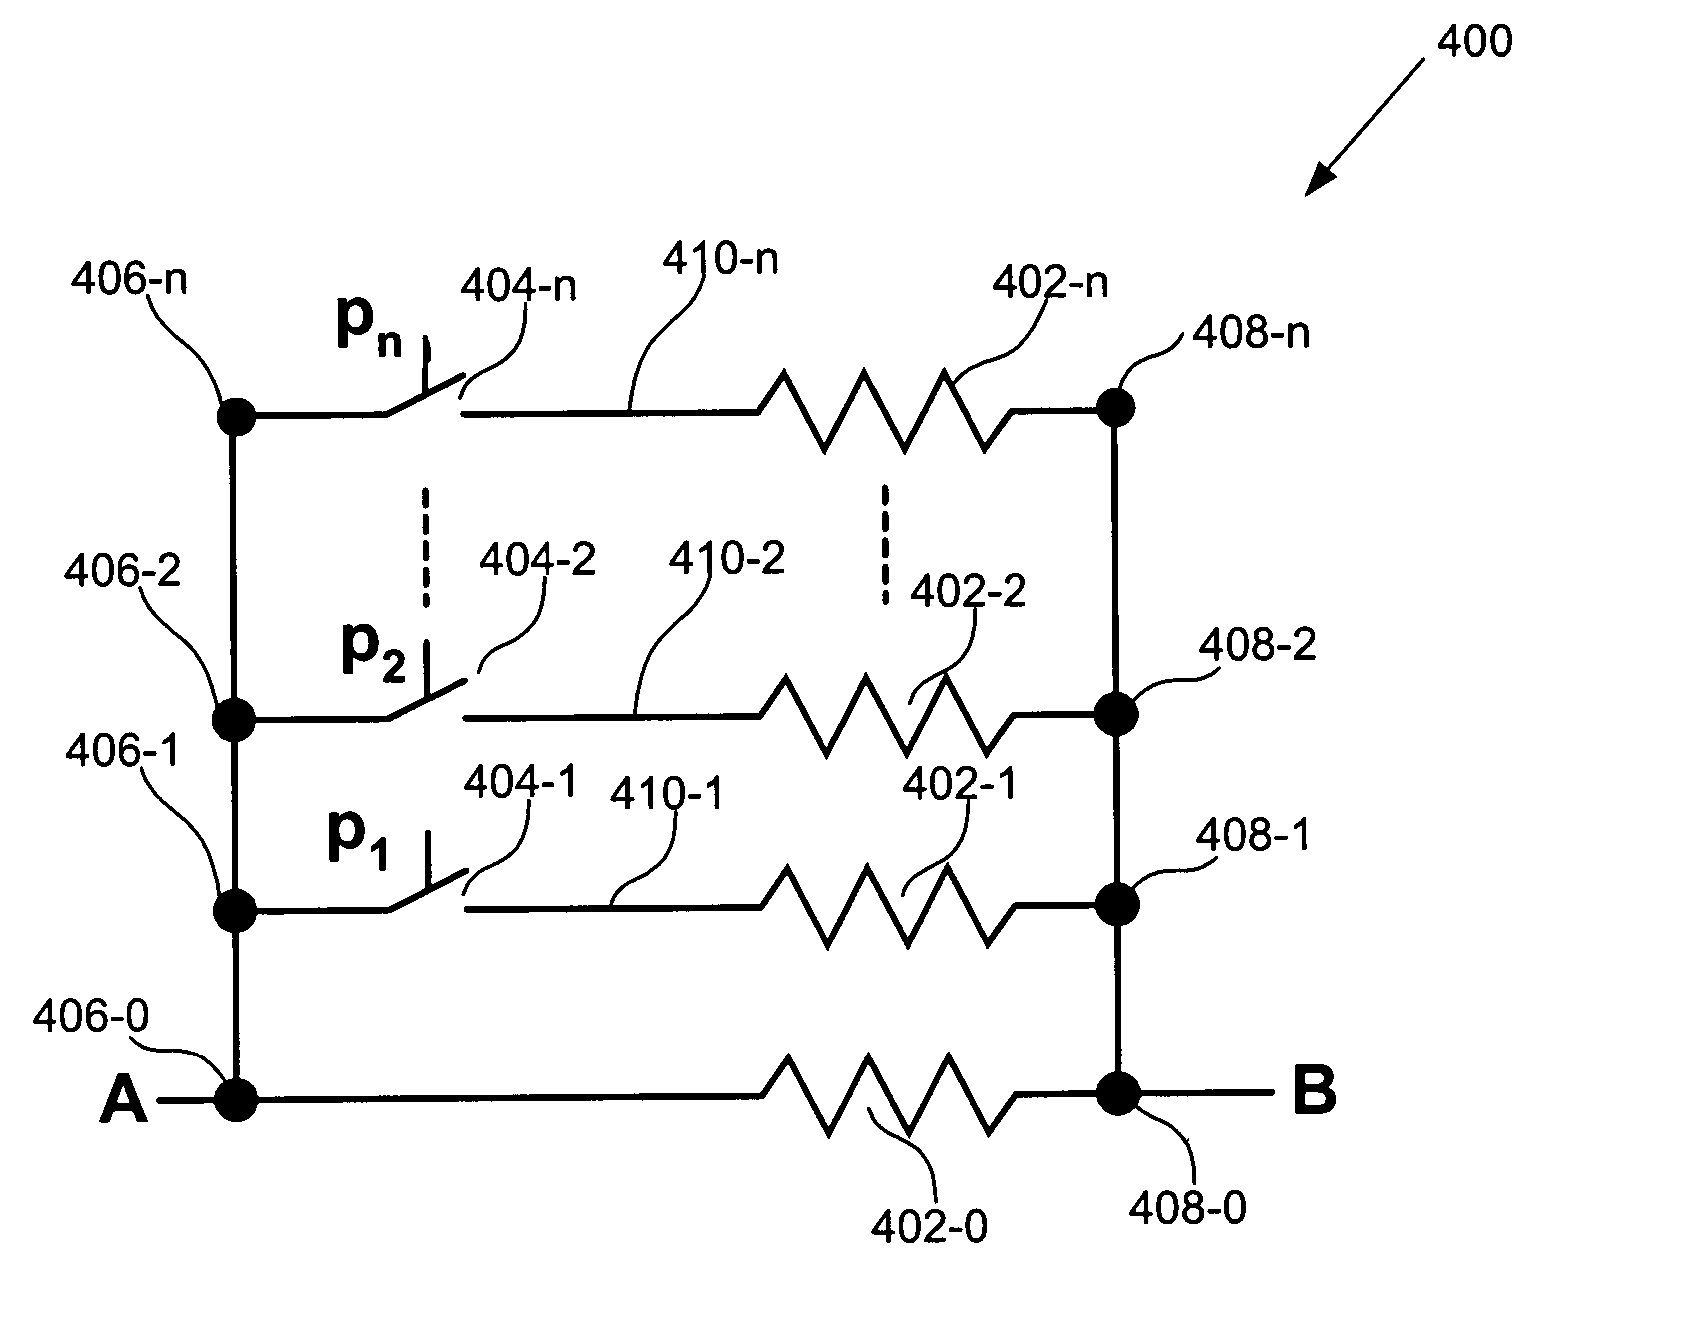 High-linearity switched-resistor network for programmability